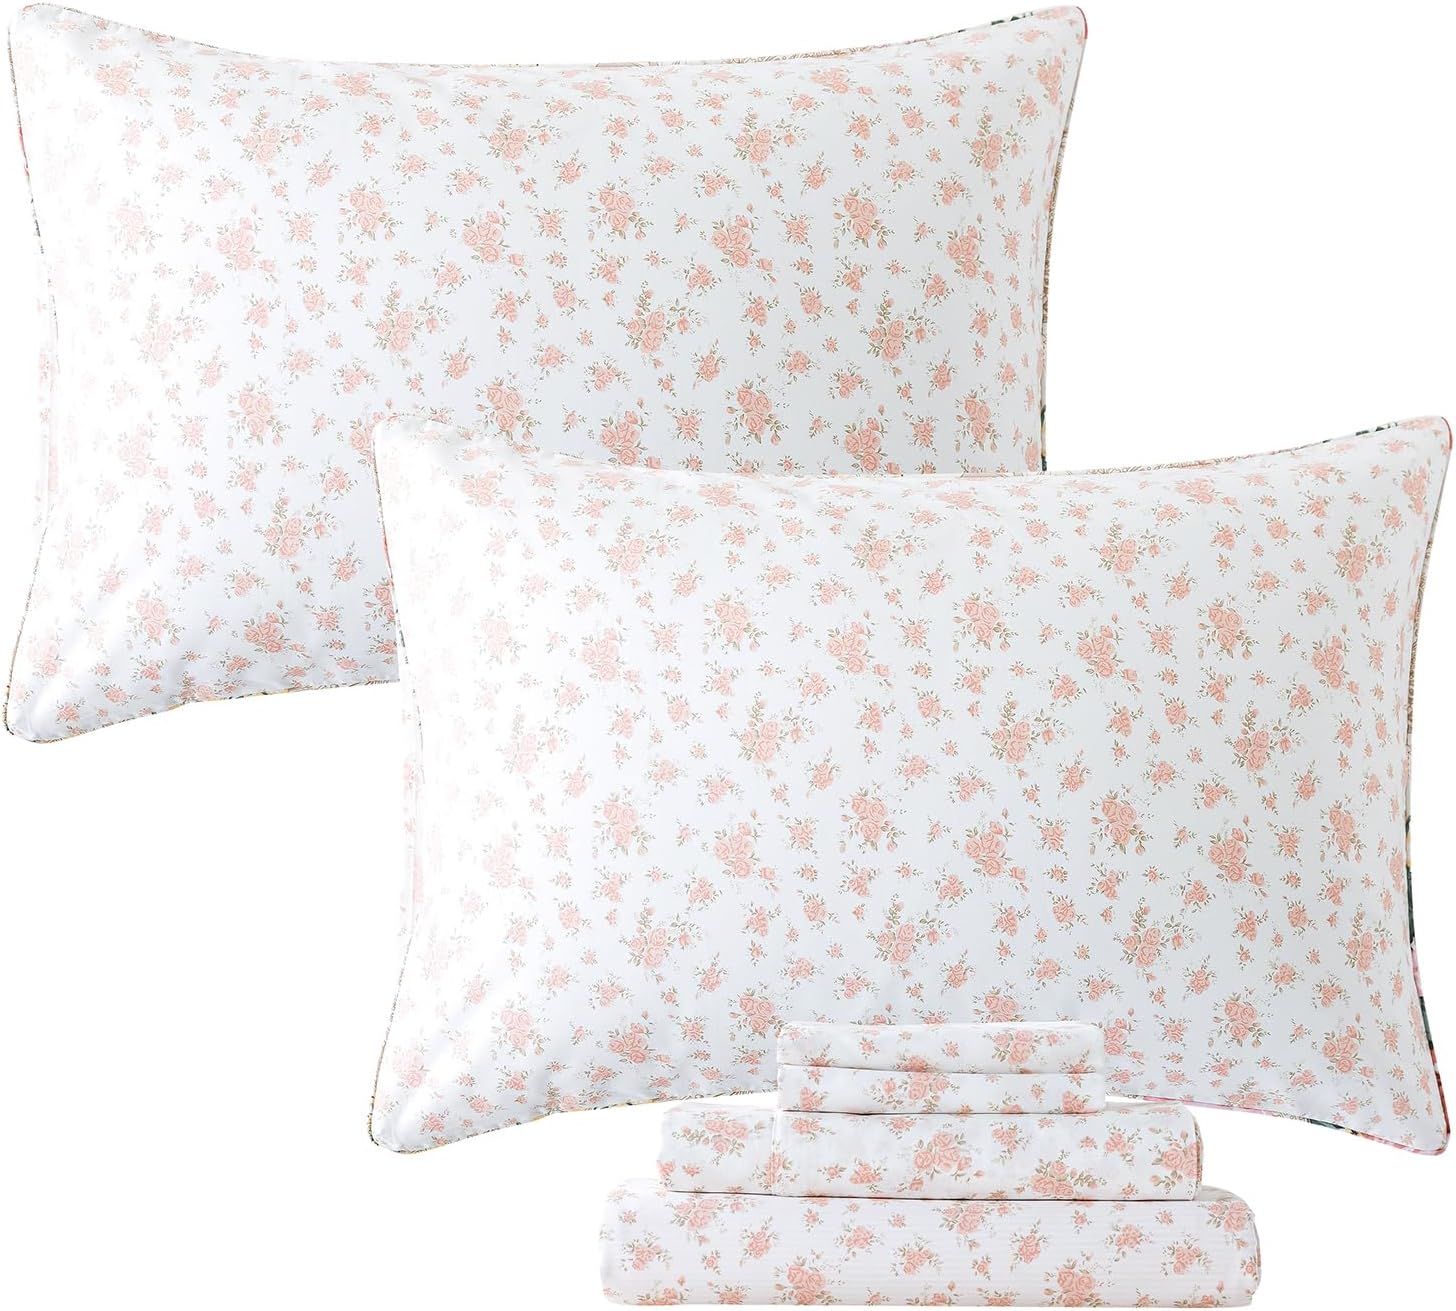 FADFAY Queen Sheet Set Pink Floral Bed Sheets Percale Cotton Shabby Vintage Chic Rose Deep Pocket Sheets Blush Flower Printed Luxury Print Super Soft Breathable for Queen Size Bed 4 Pcs